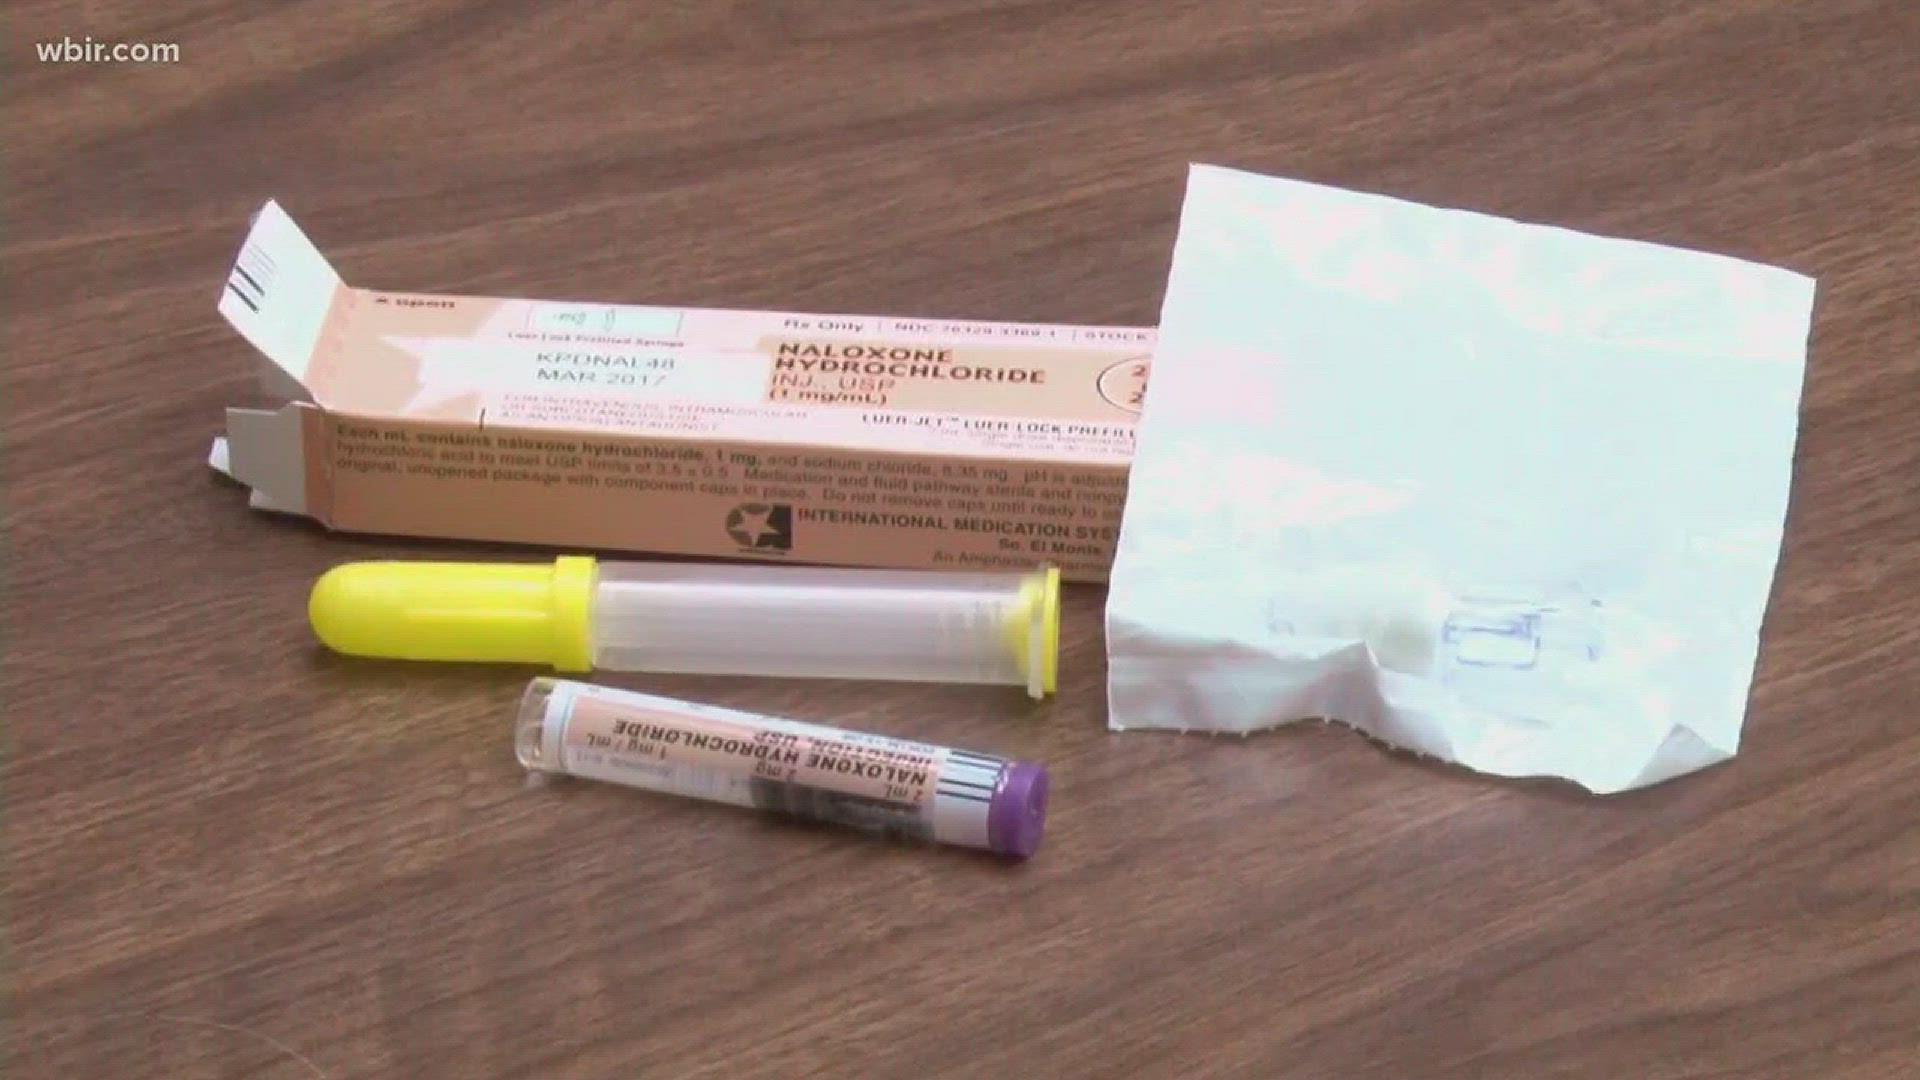 Oct. 23, 2017: The Knox County Commission took steps to prevent more overdose deaths by approving a Naloxone grant and donation for the Knox County Sheriff's Office.